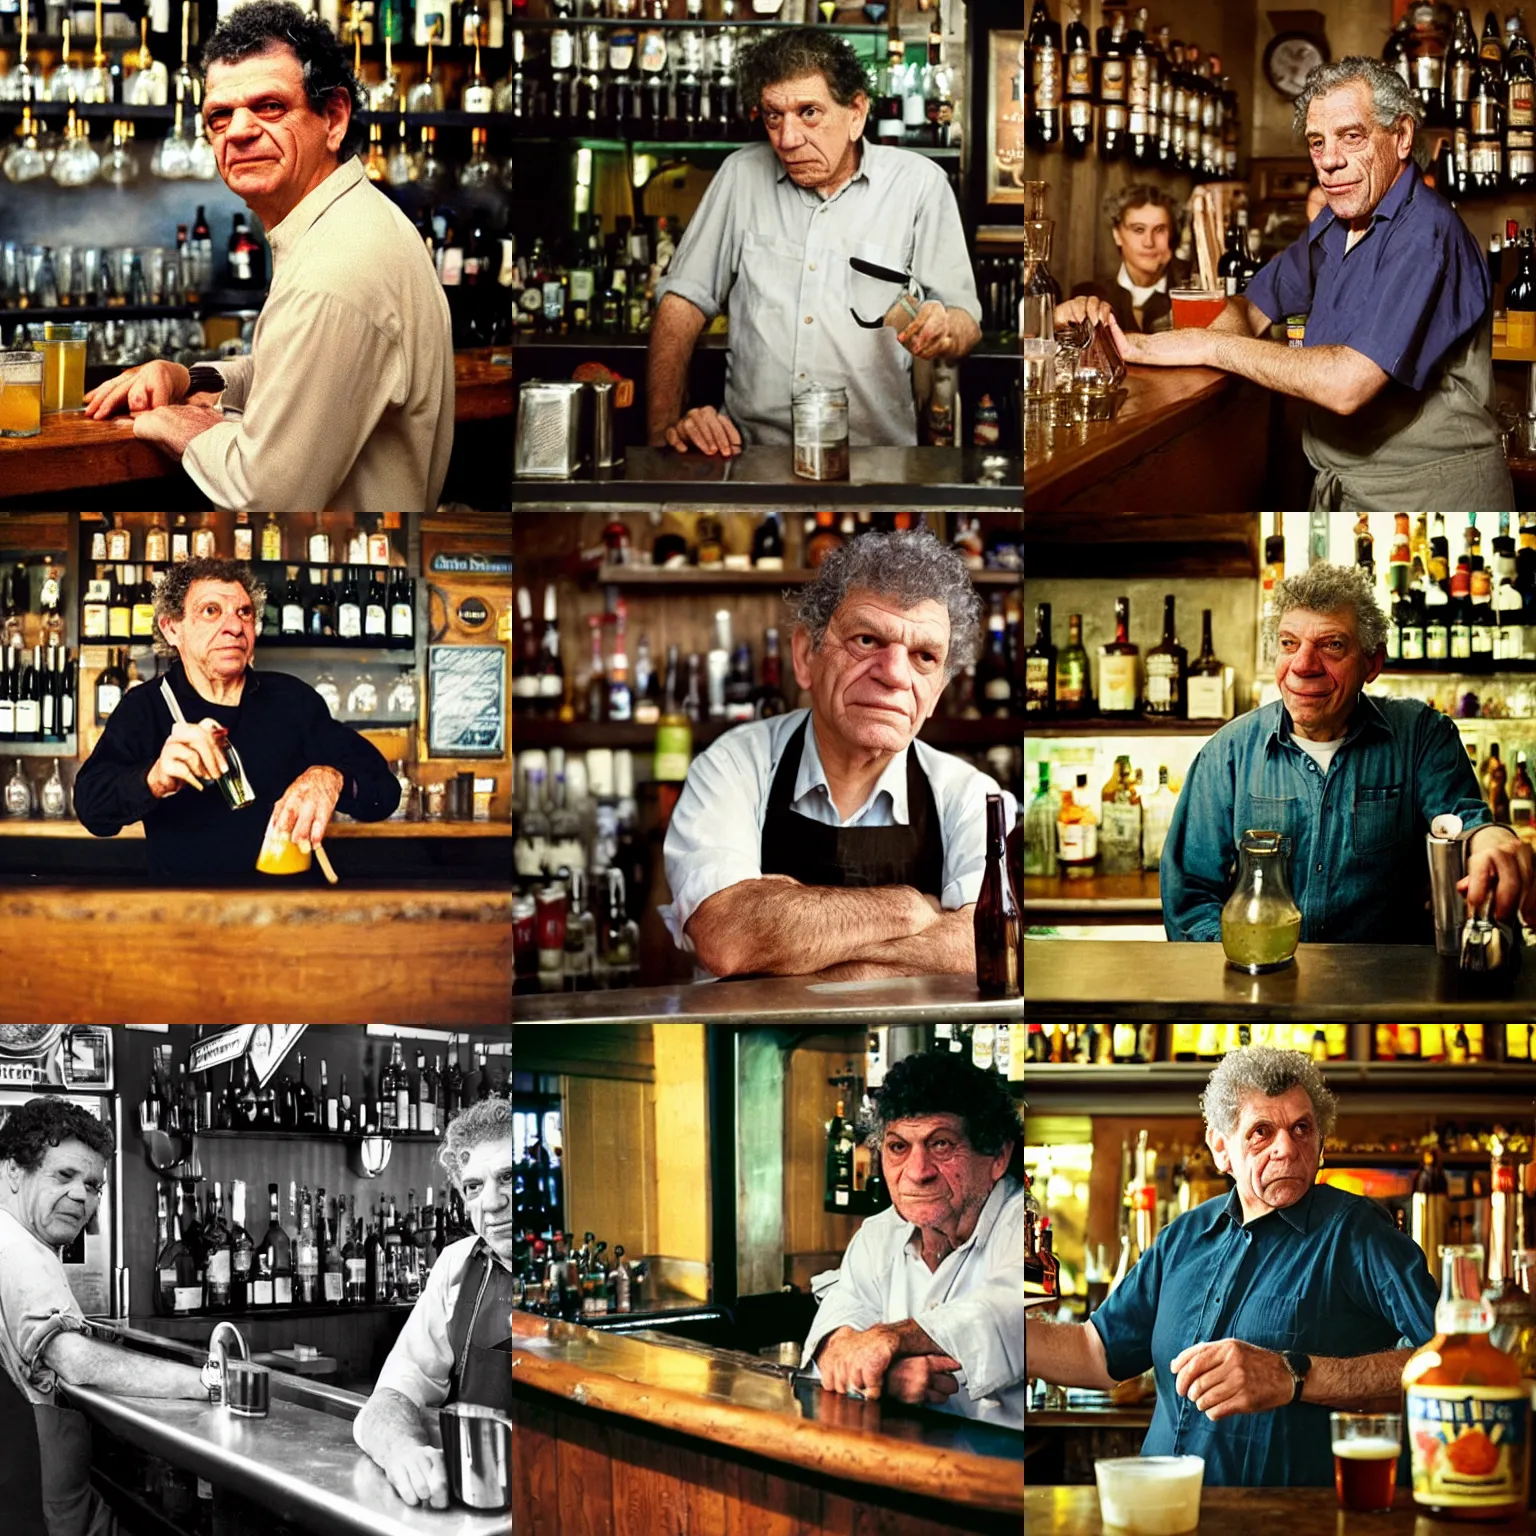 Prompt: candid portrait photograph of moe szyslak working behind a bar in a pub, photo by annie leibowitz and steve mccurry